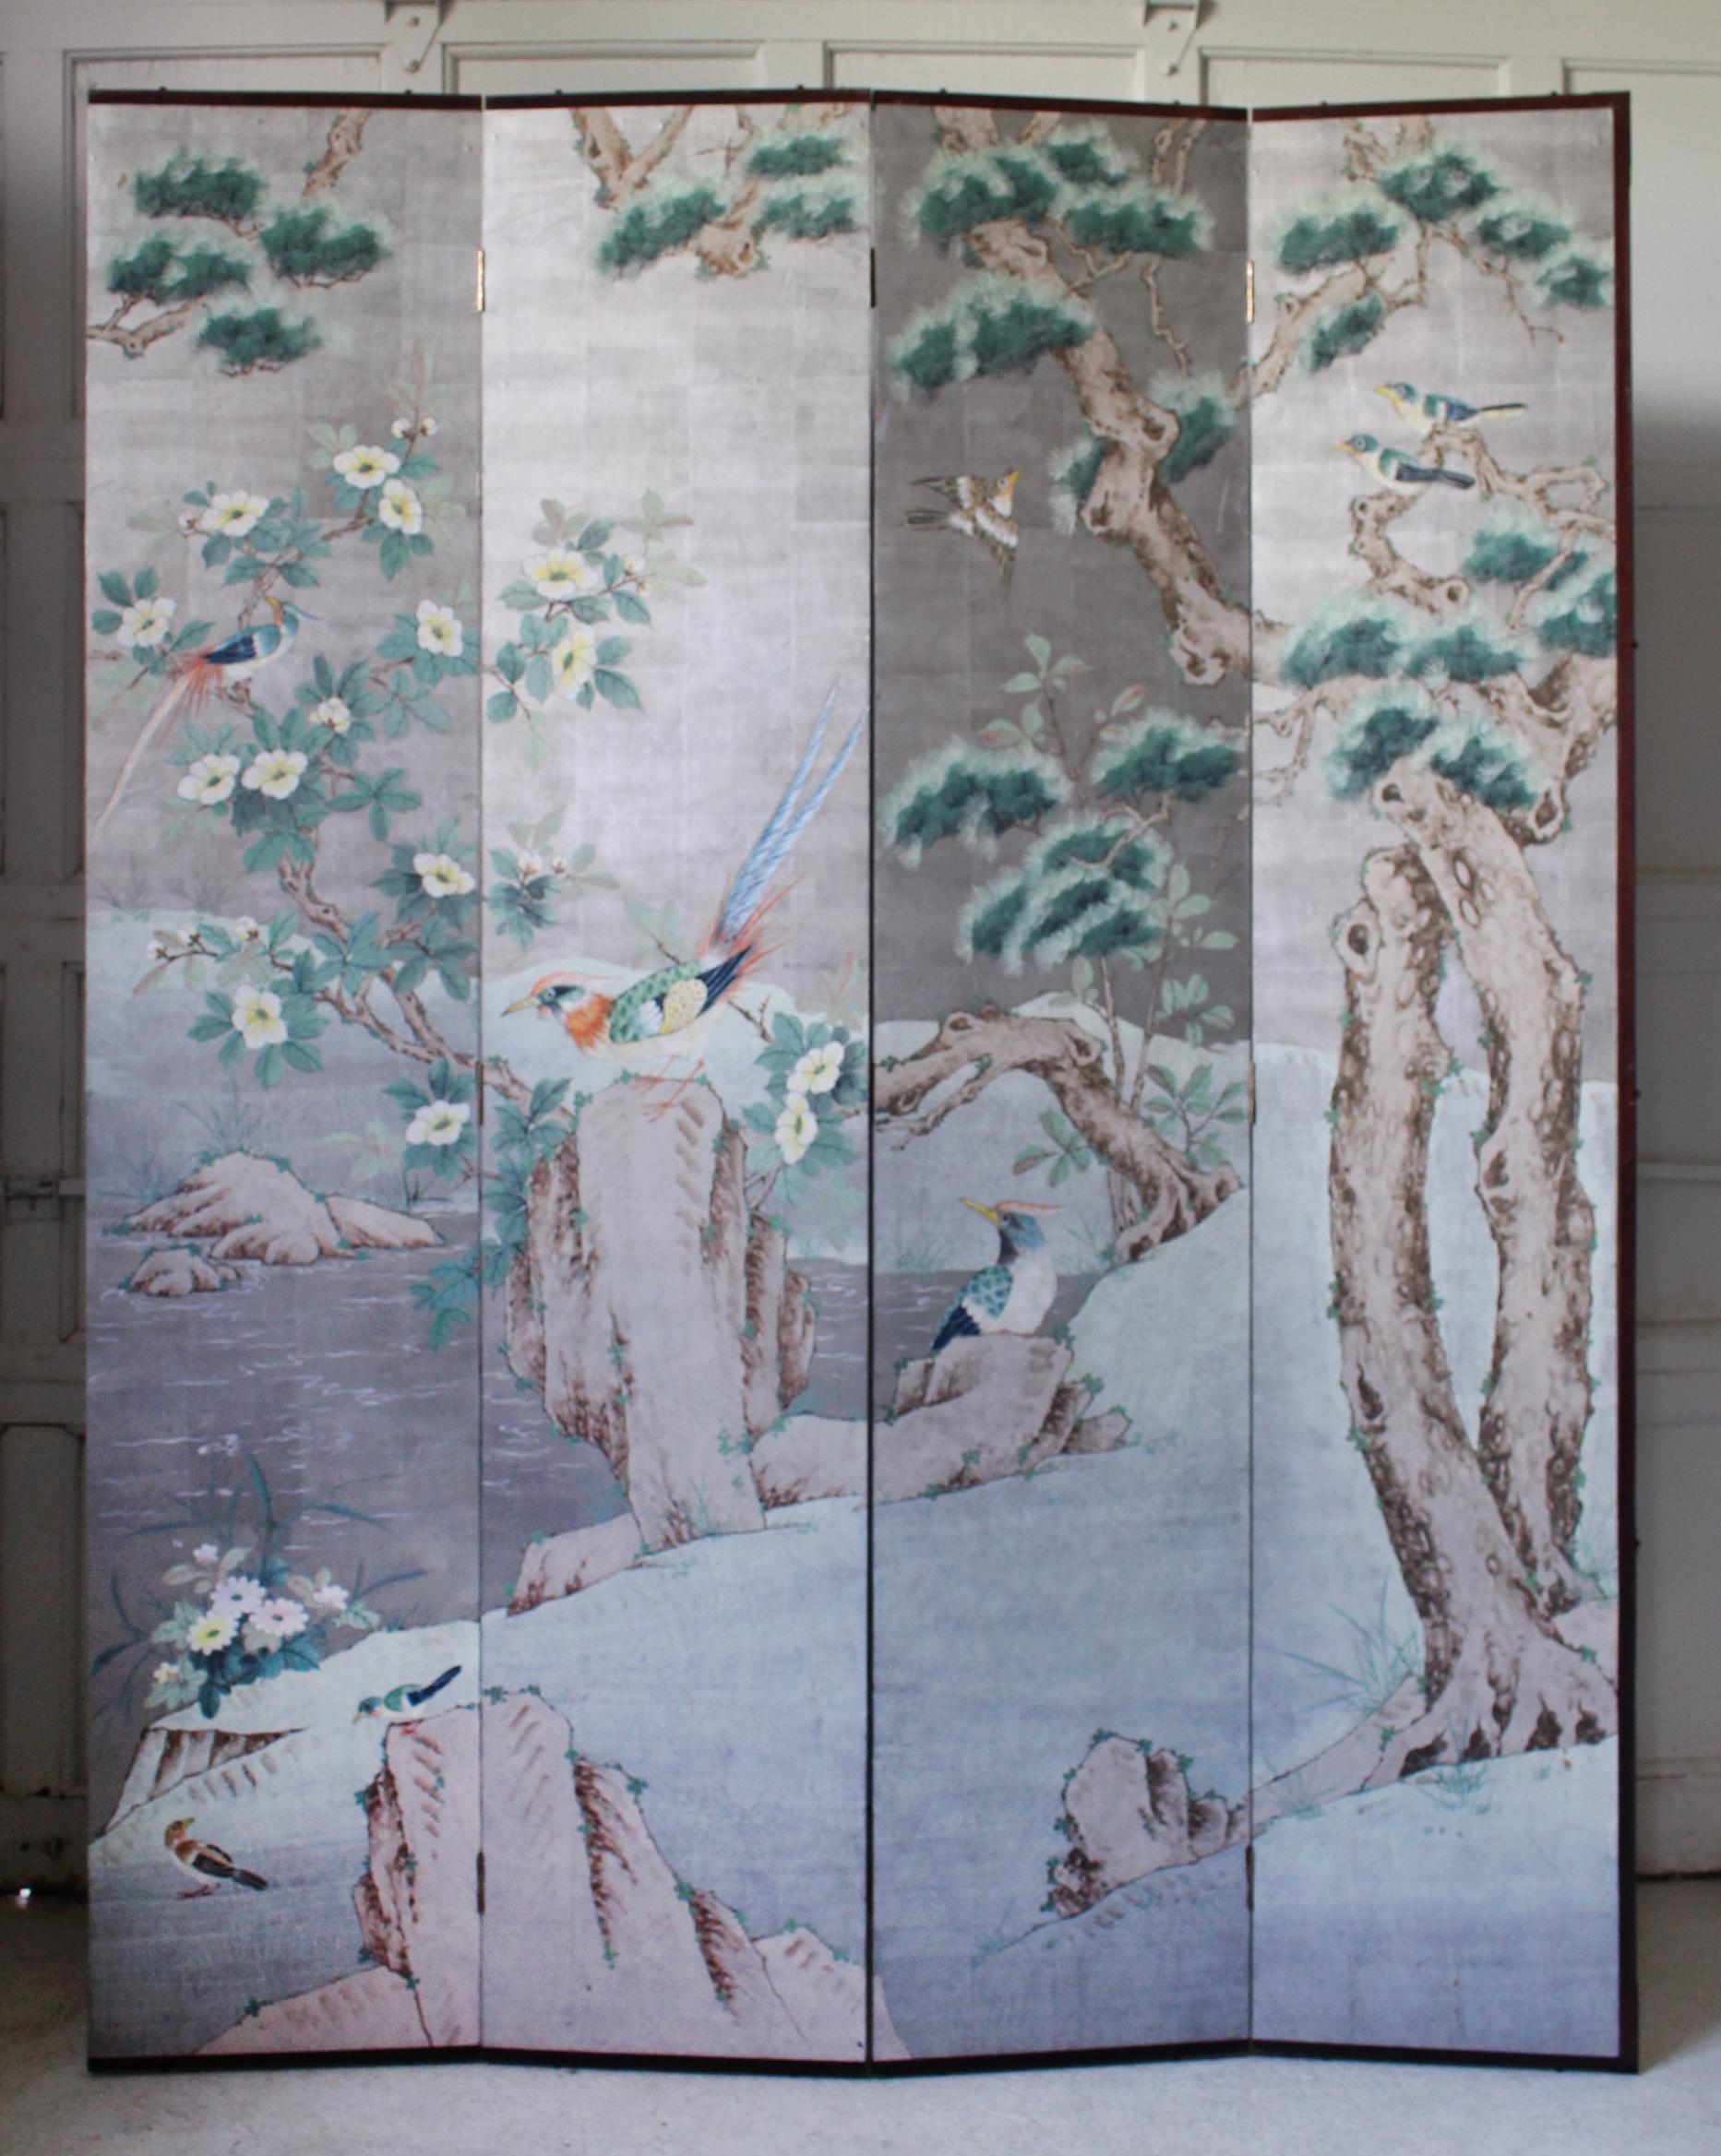 Vintage silver paper chinoiserie screen. 8 panels (4 panels each screen). Beautiful hand painted birds and cherry blossoms. Wooden frame with brass hinges.

Measurements open (one screen): 54.25